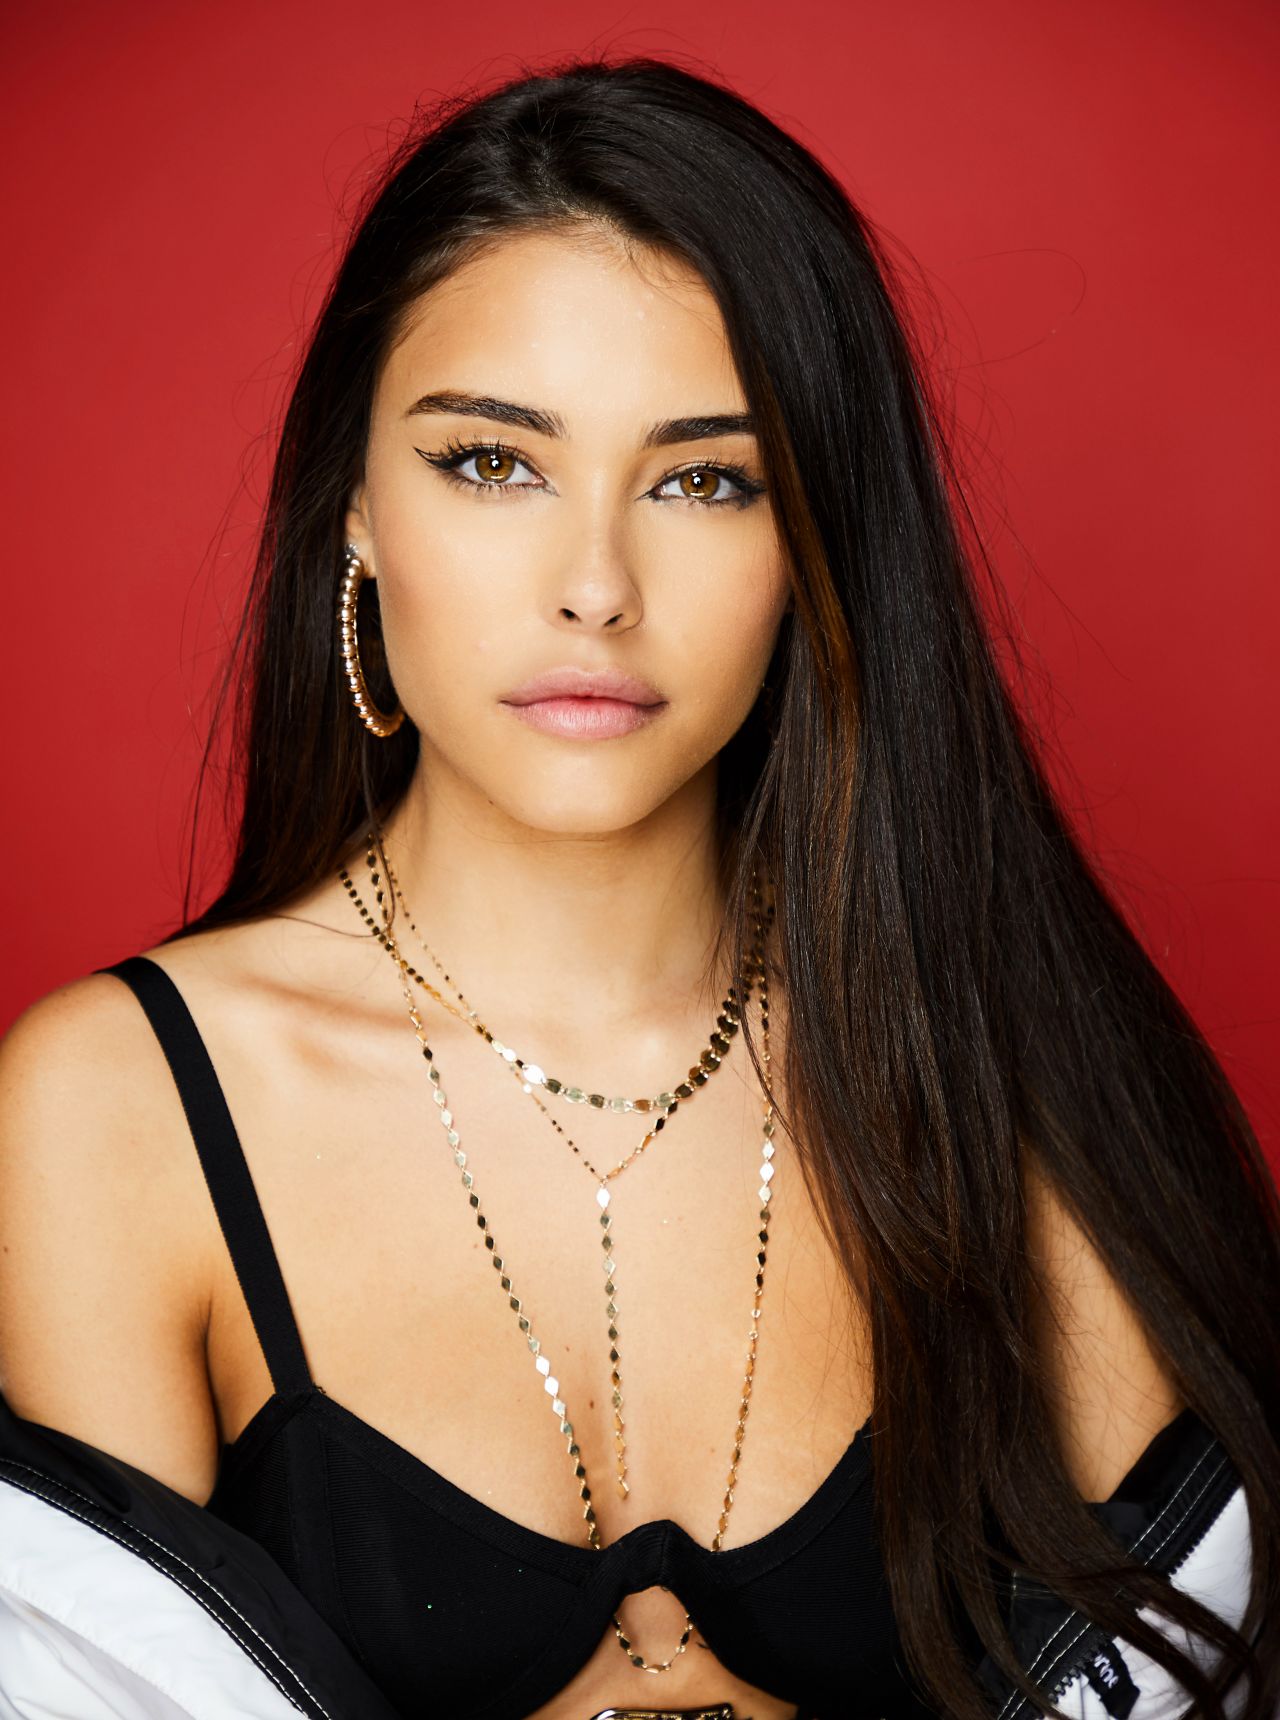 Madison Beer Portrait at 2018 KIIS-FM Wallpapers